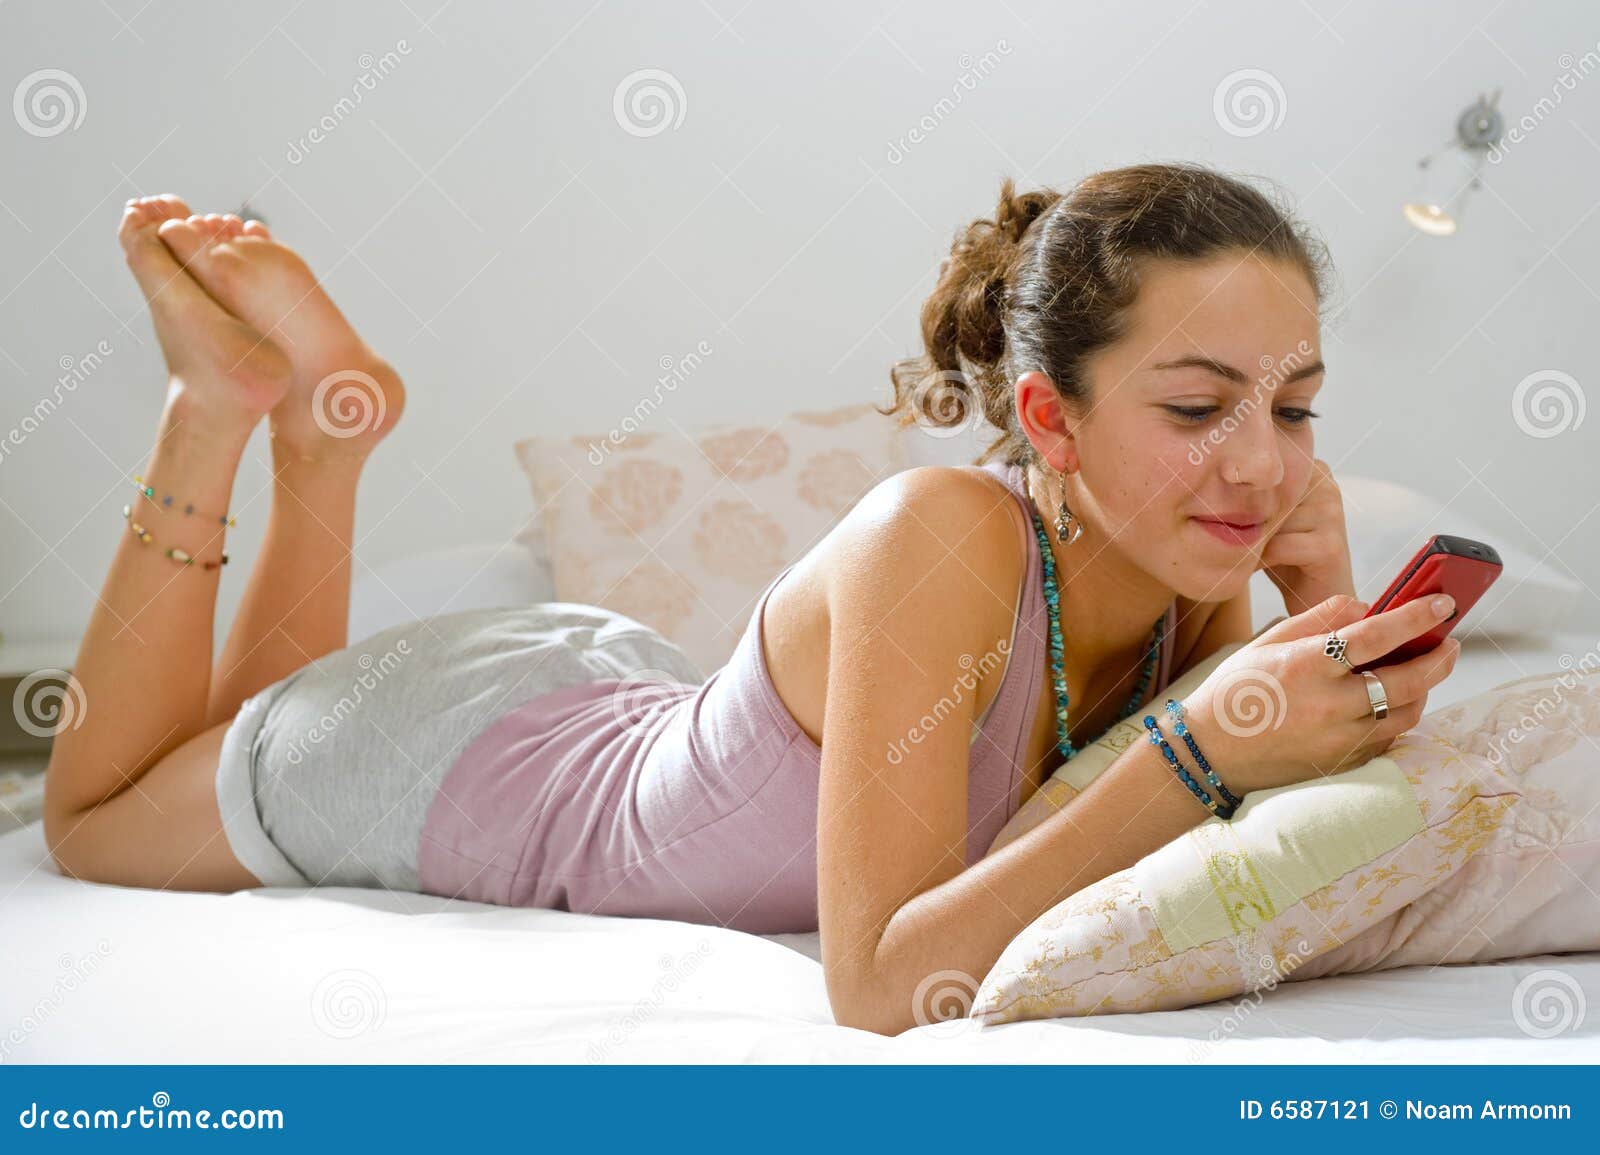 teenager girl bed cell phone